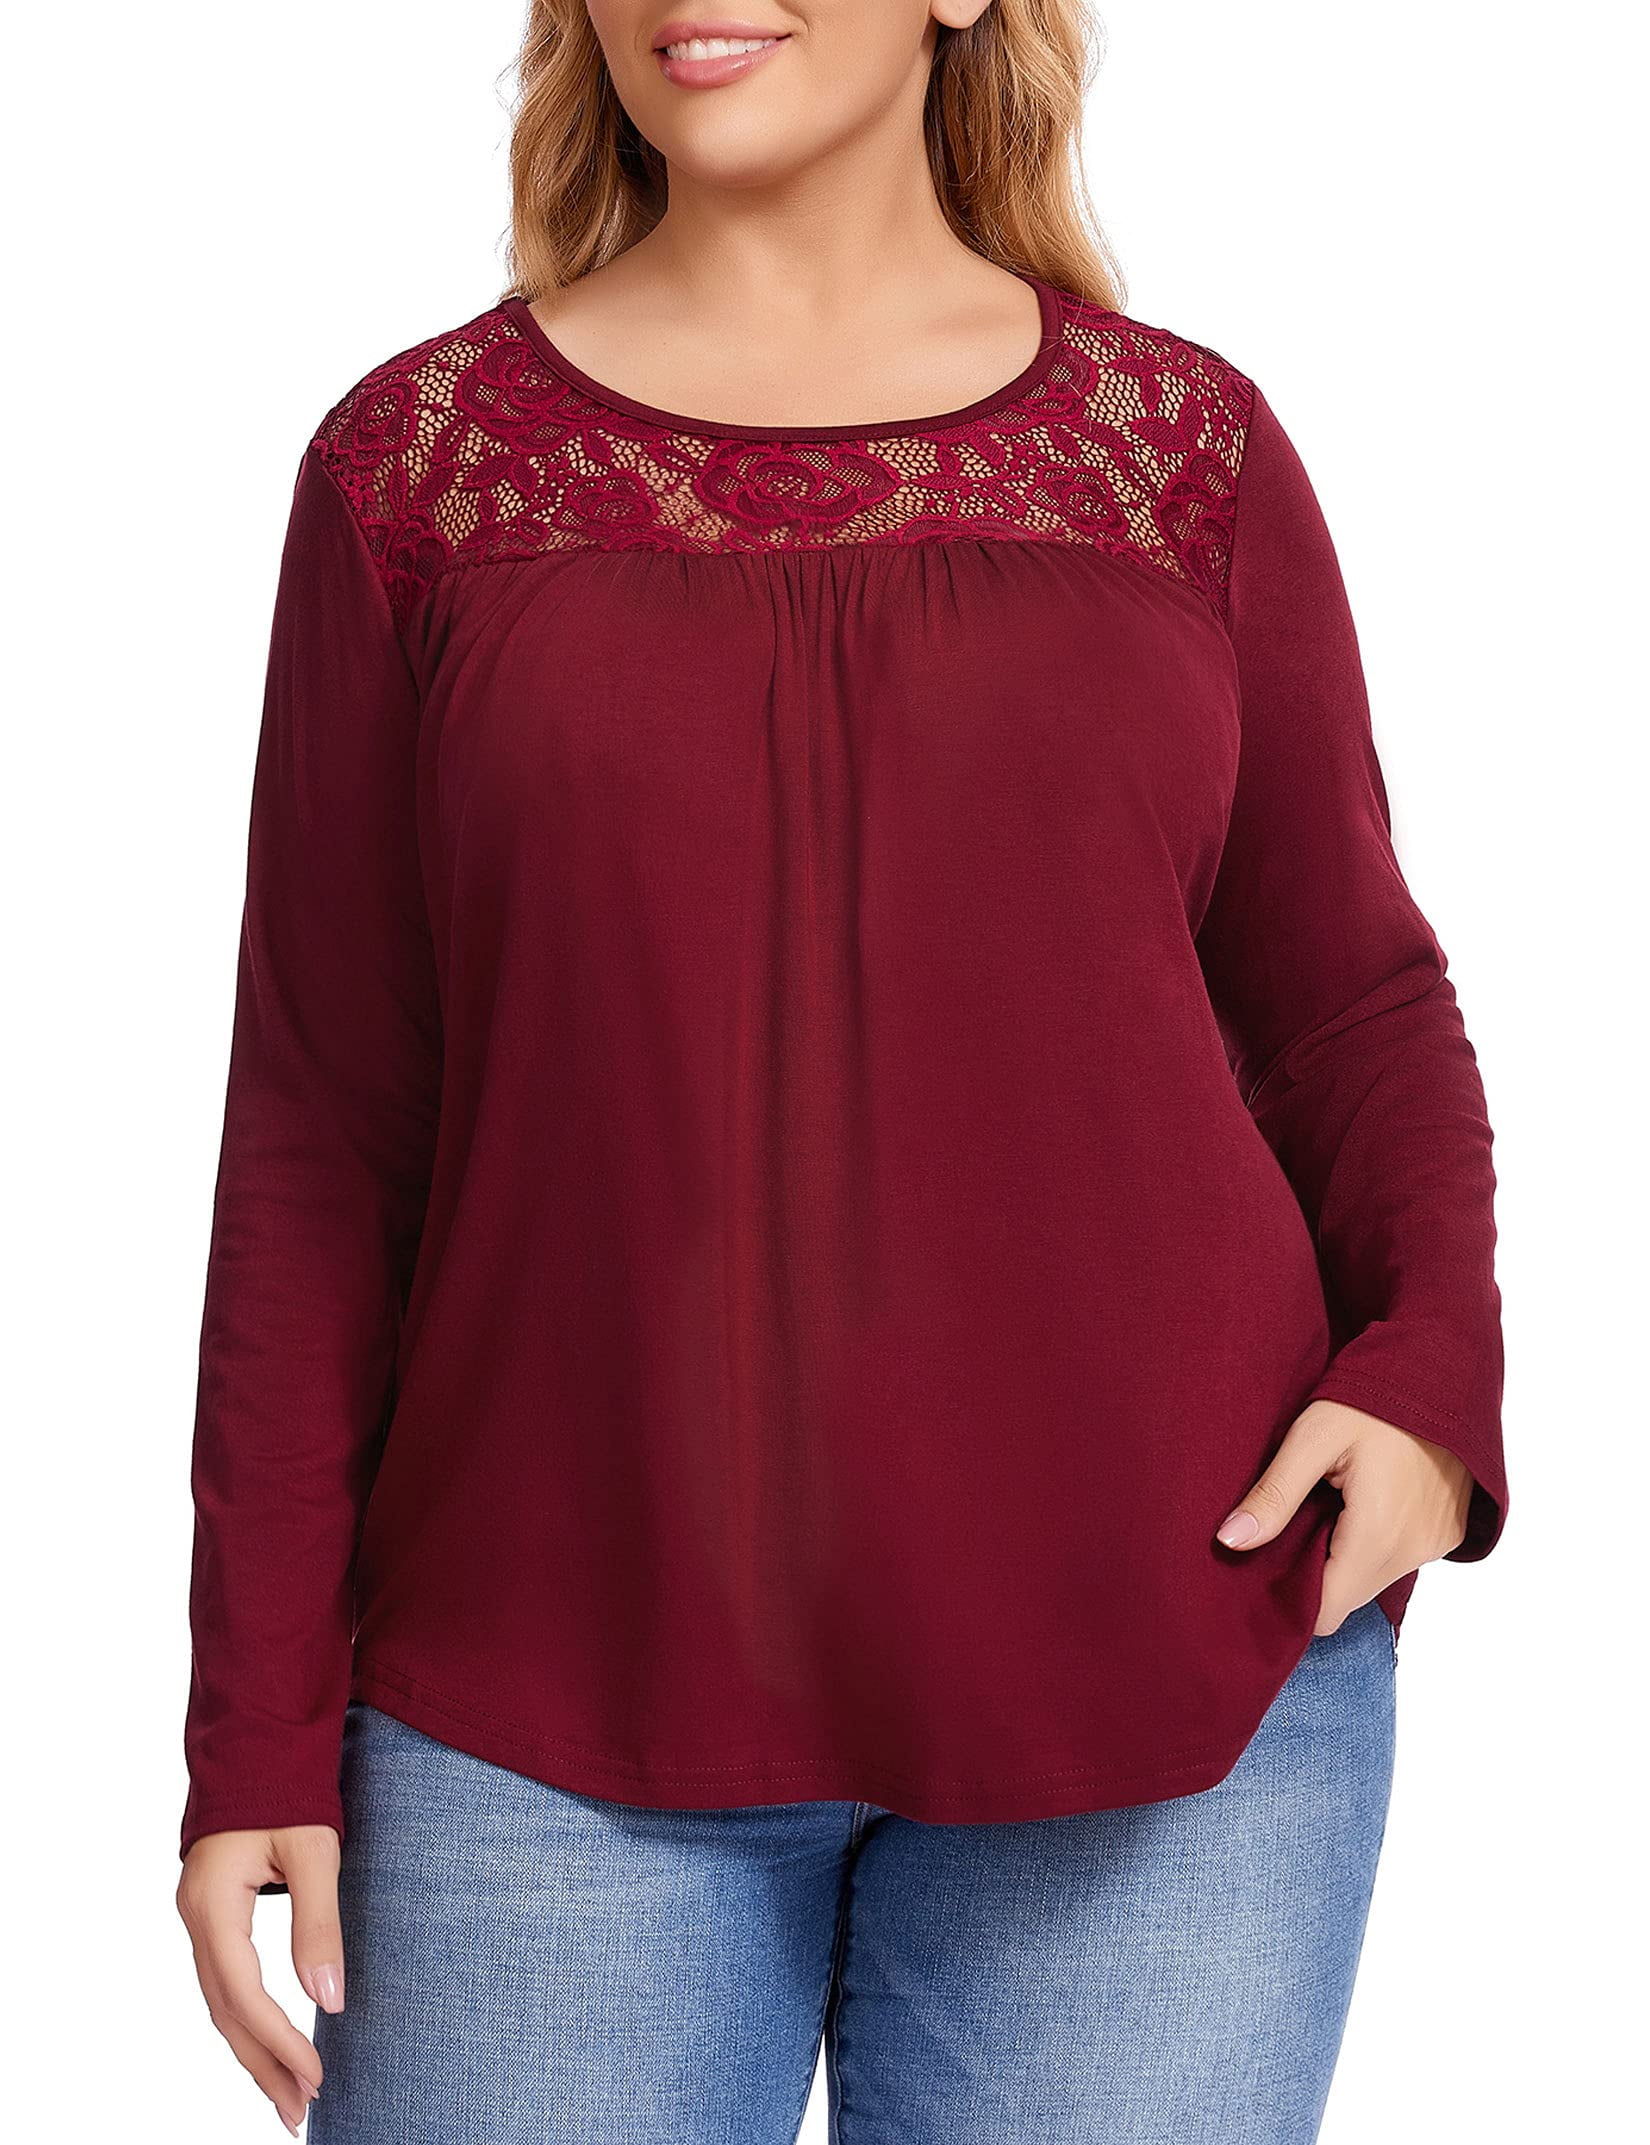 Women Plus Size Lace Pleated Shirt Round Neck Short Sleeve Loose Blouse  Summer Casual Tunic Top Long Sleeve Black XL 